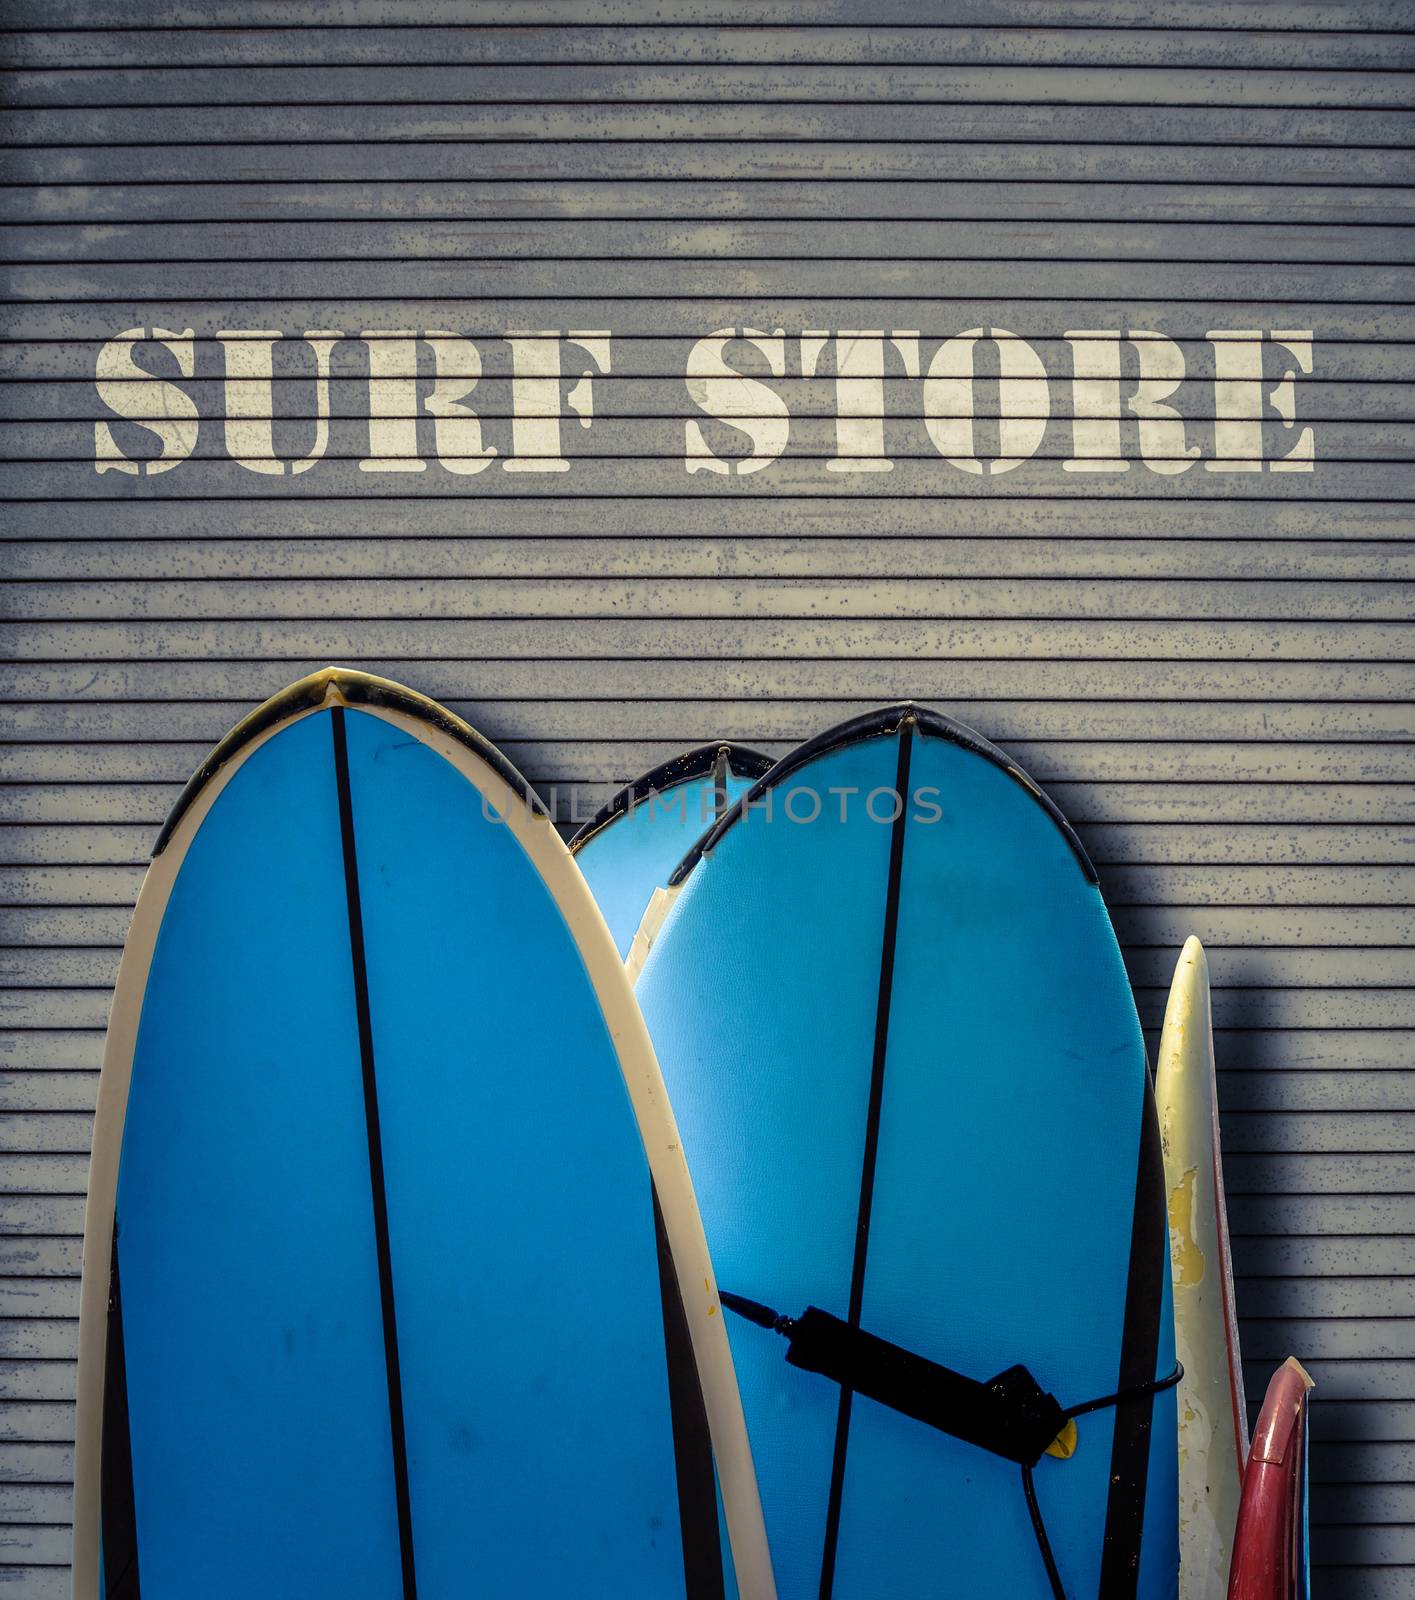 Retro Surf Store With Boards by mrdoomits